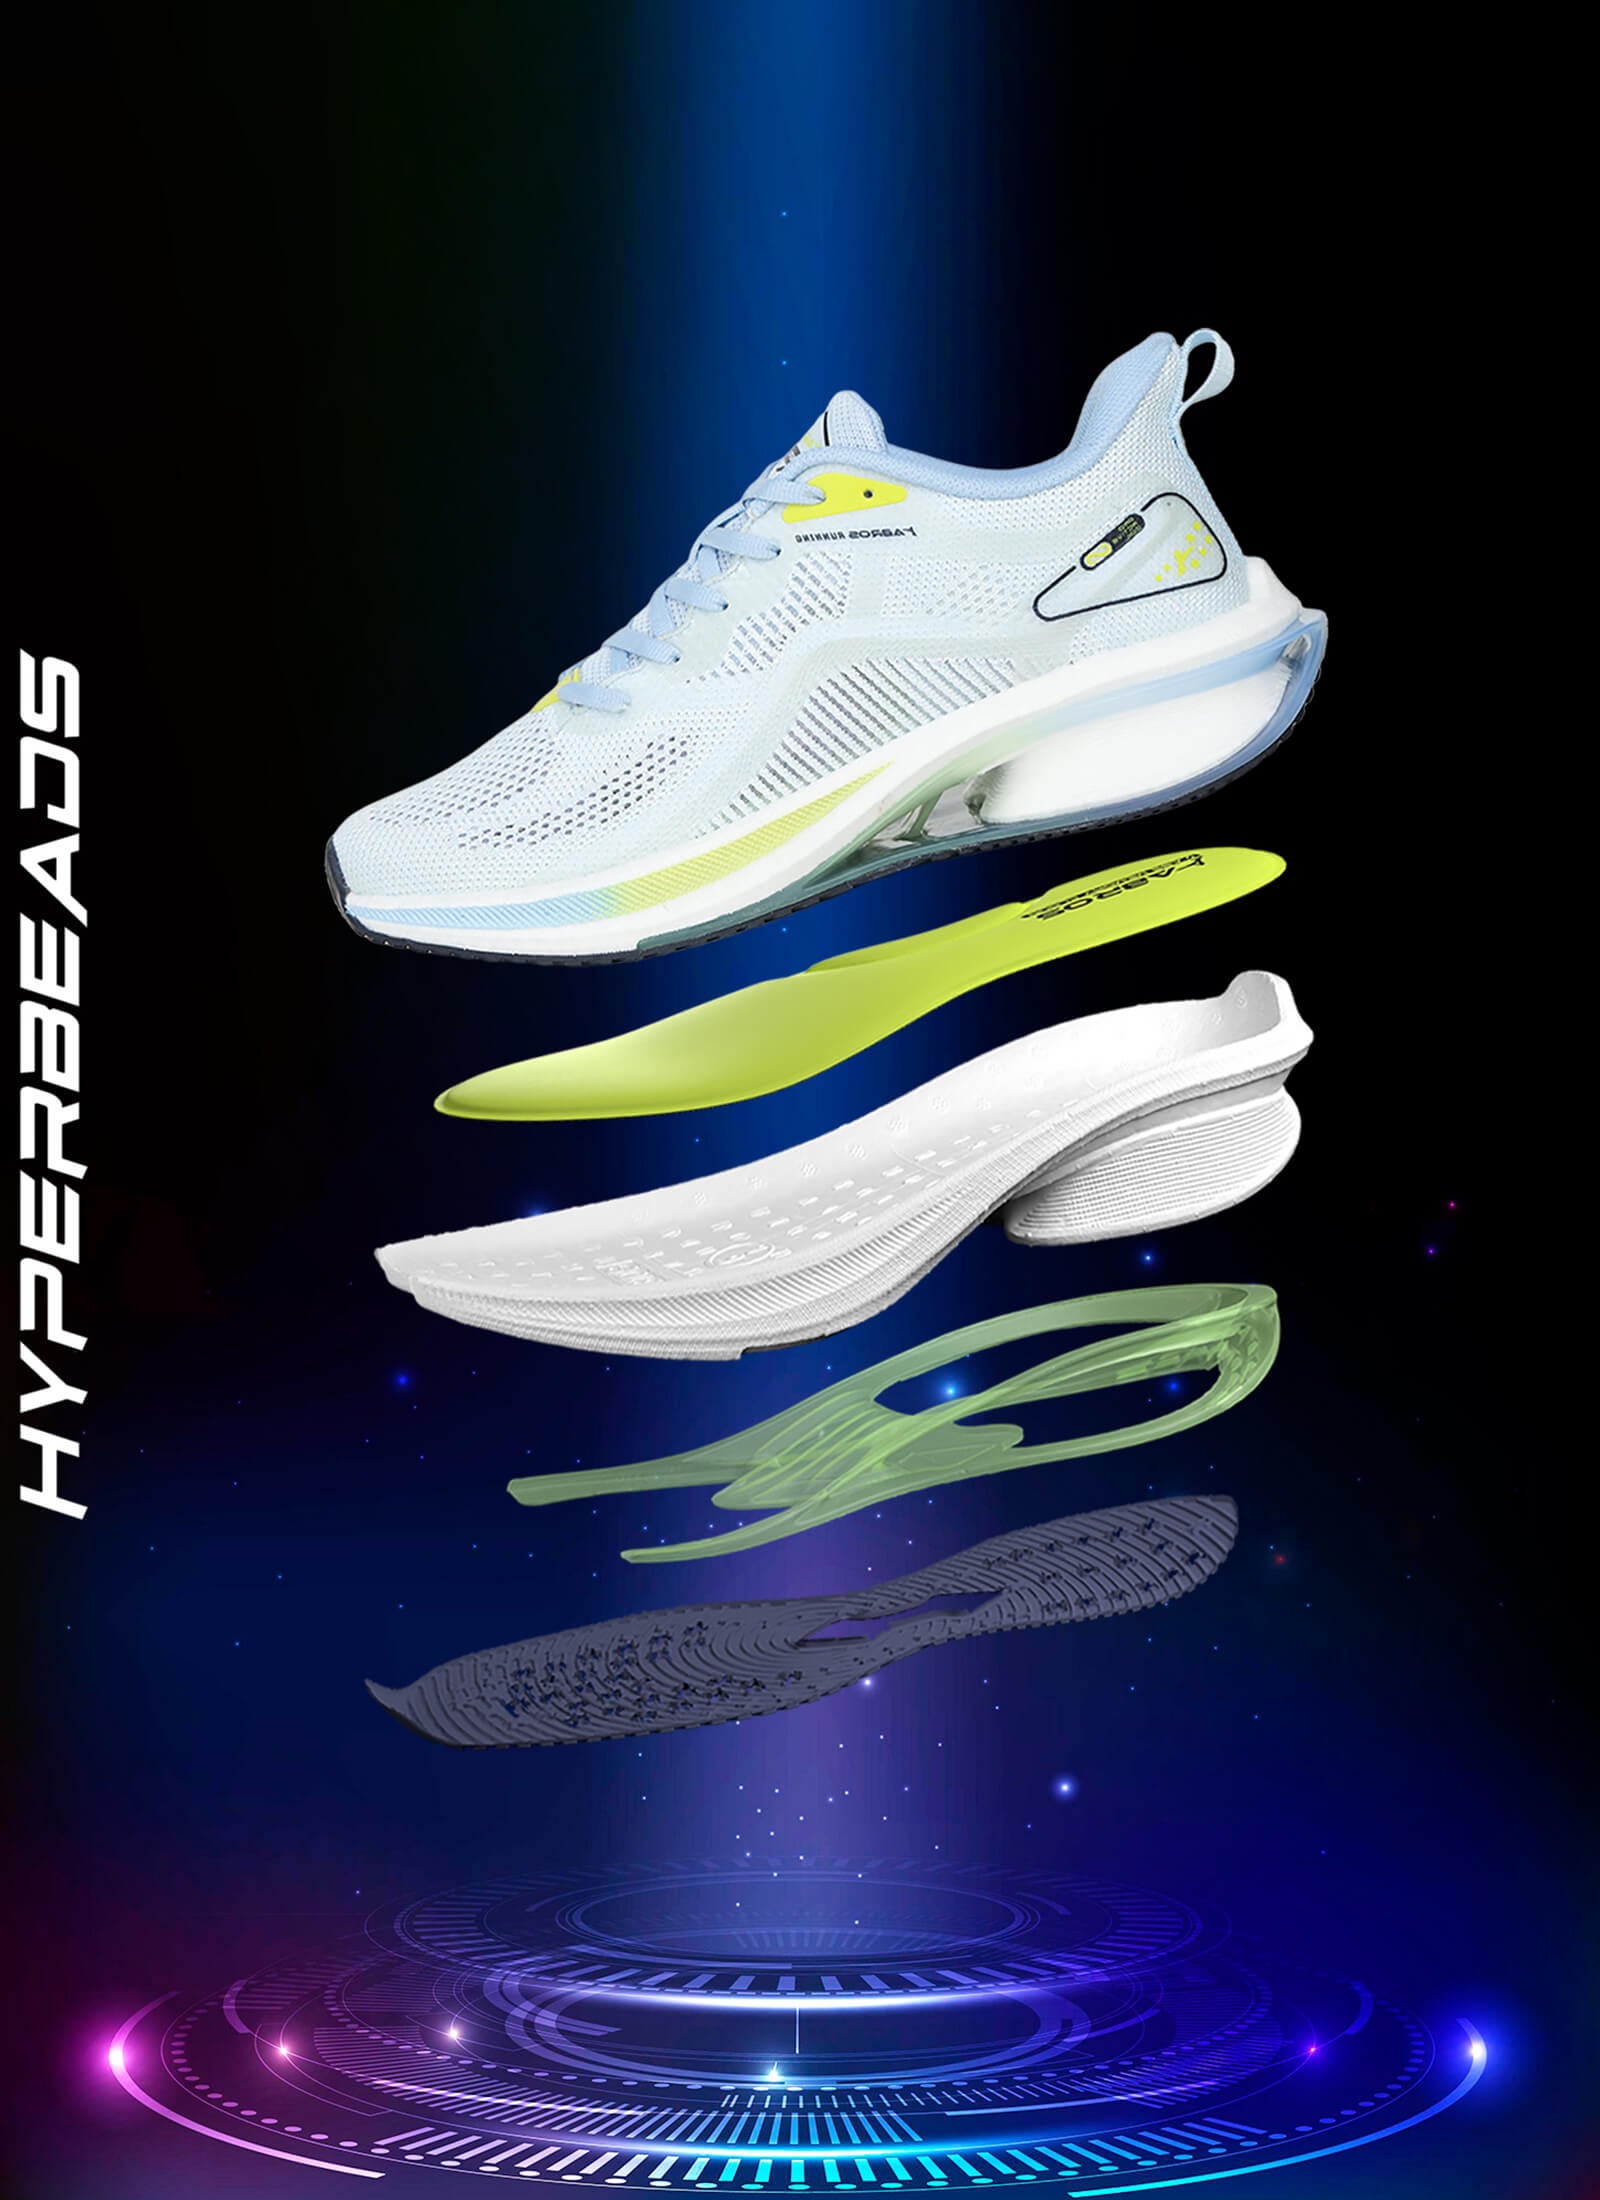 Super Hyper Beads Sports Shoes for Men